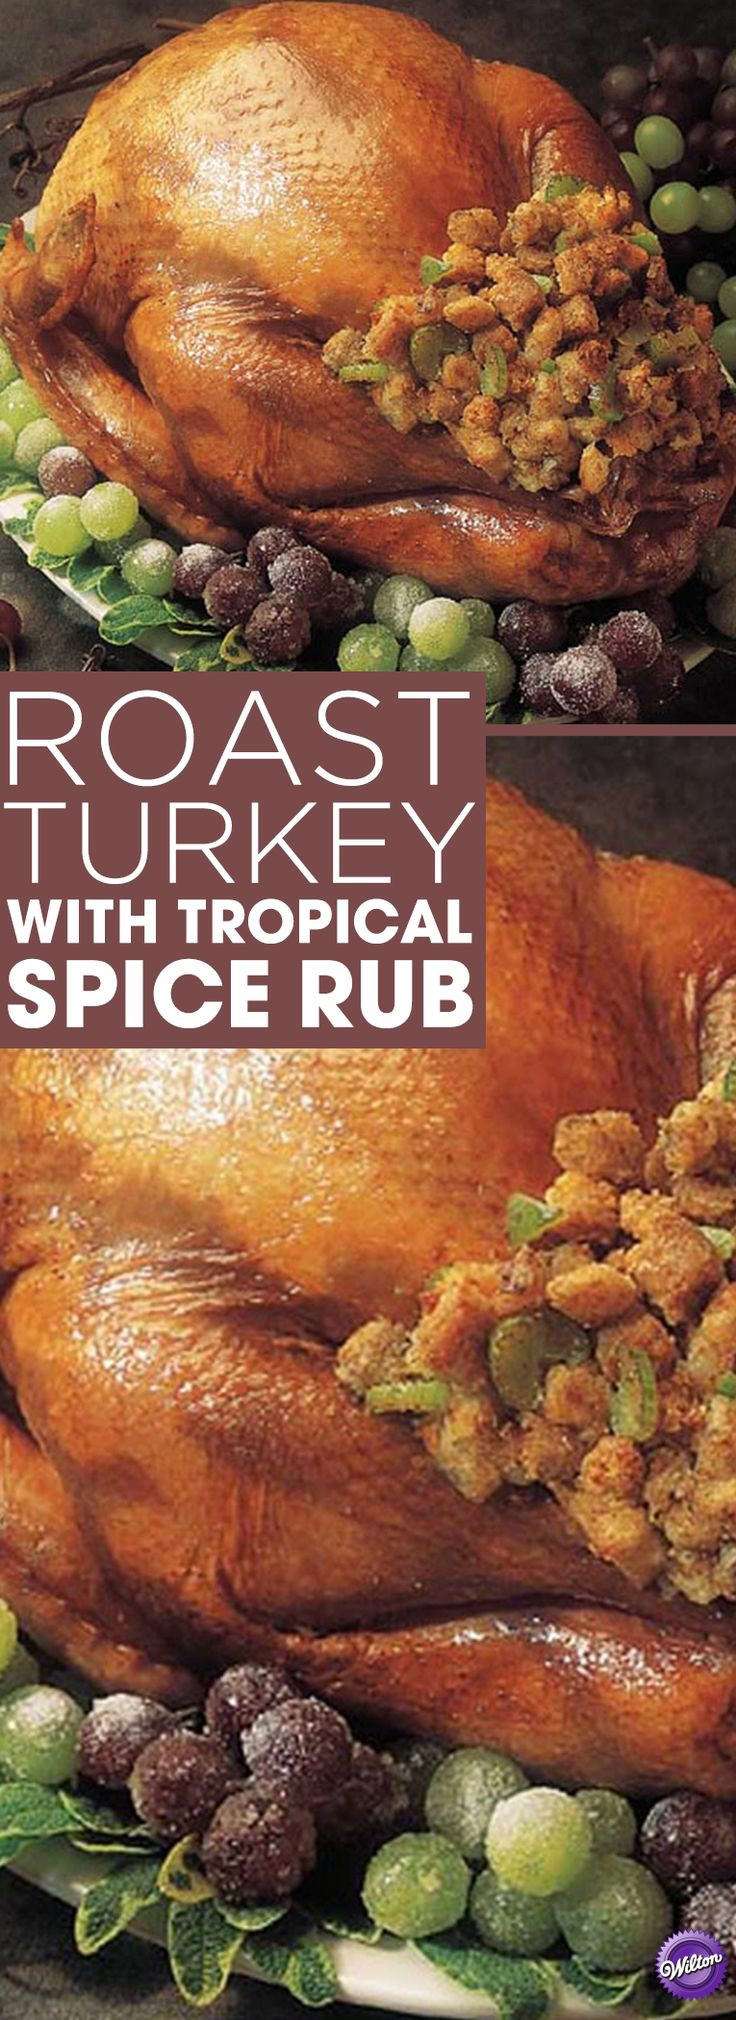 Thanksgiving Turkey Rub
 43 best images about Thanksgiving Recipes on Pinterest